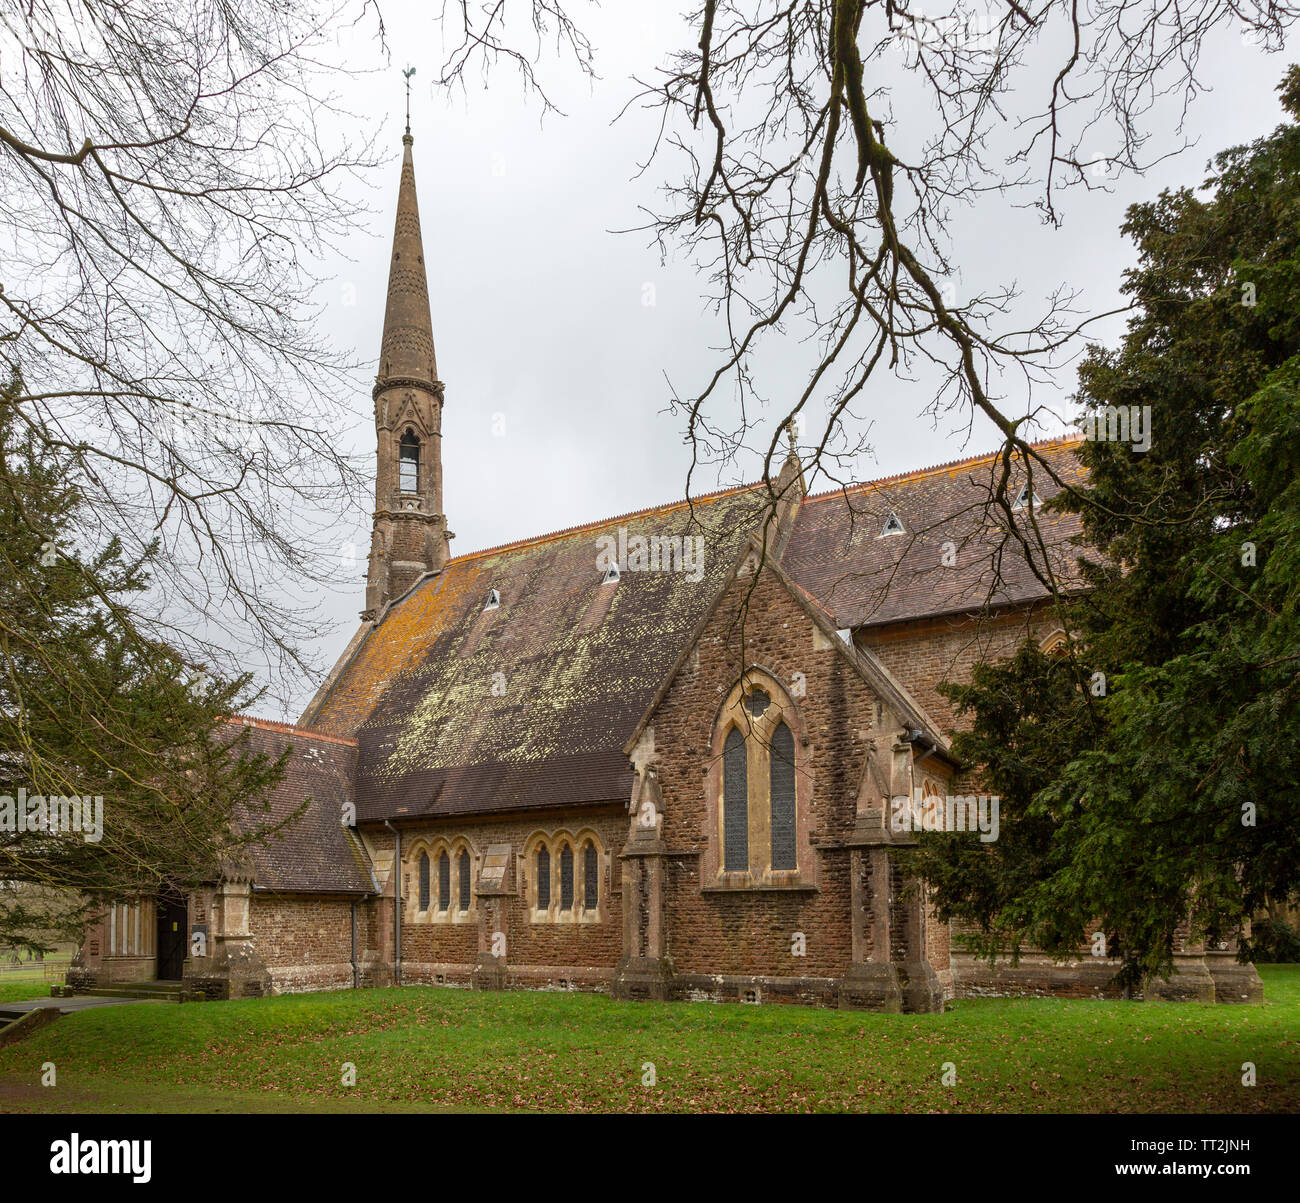 Victorian 19th century architecture church of Saint Mary, South Tidworth, Wiltshire, England, UK Stock Photo